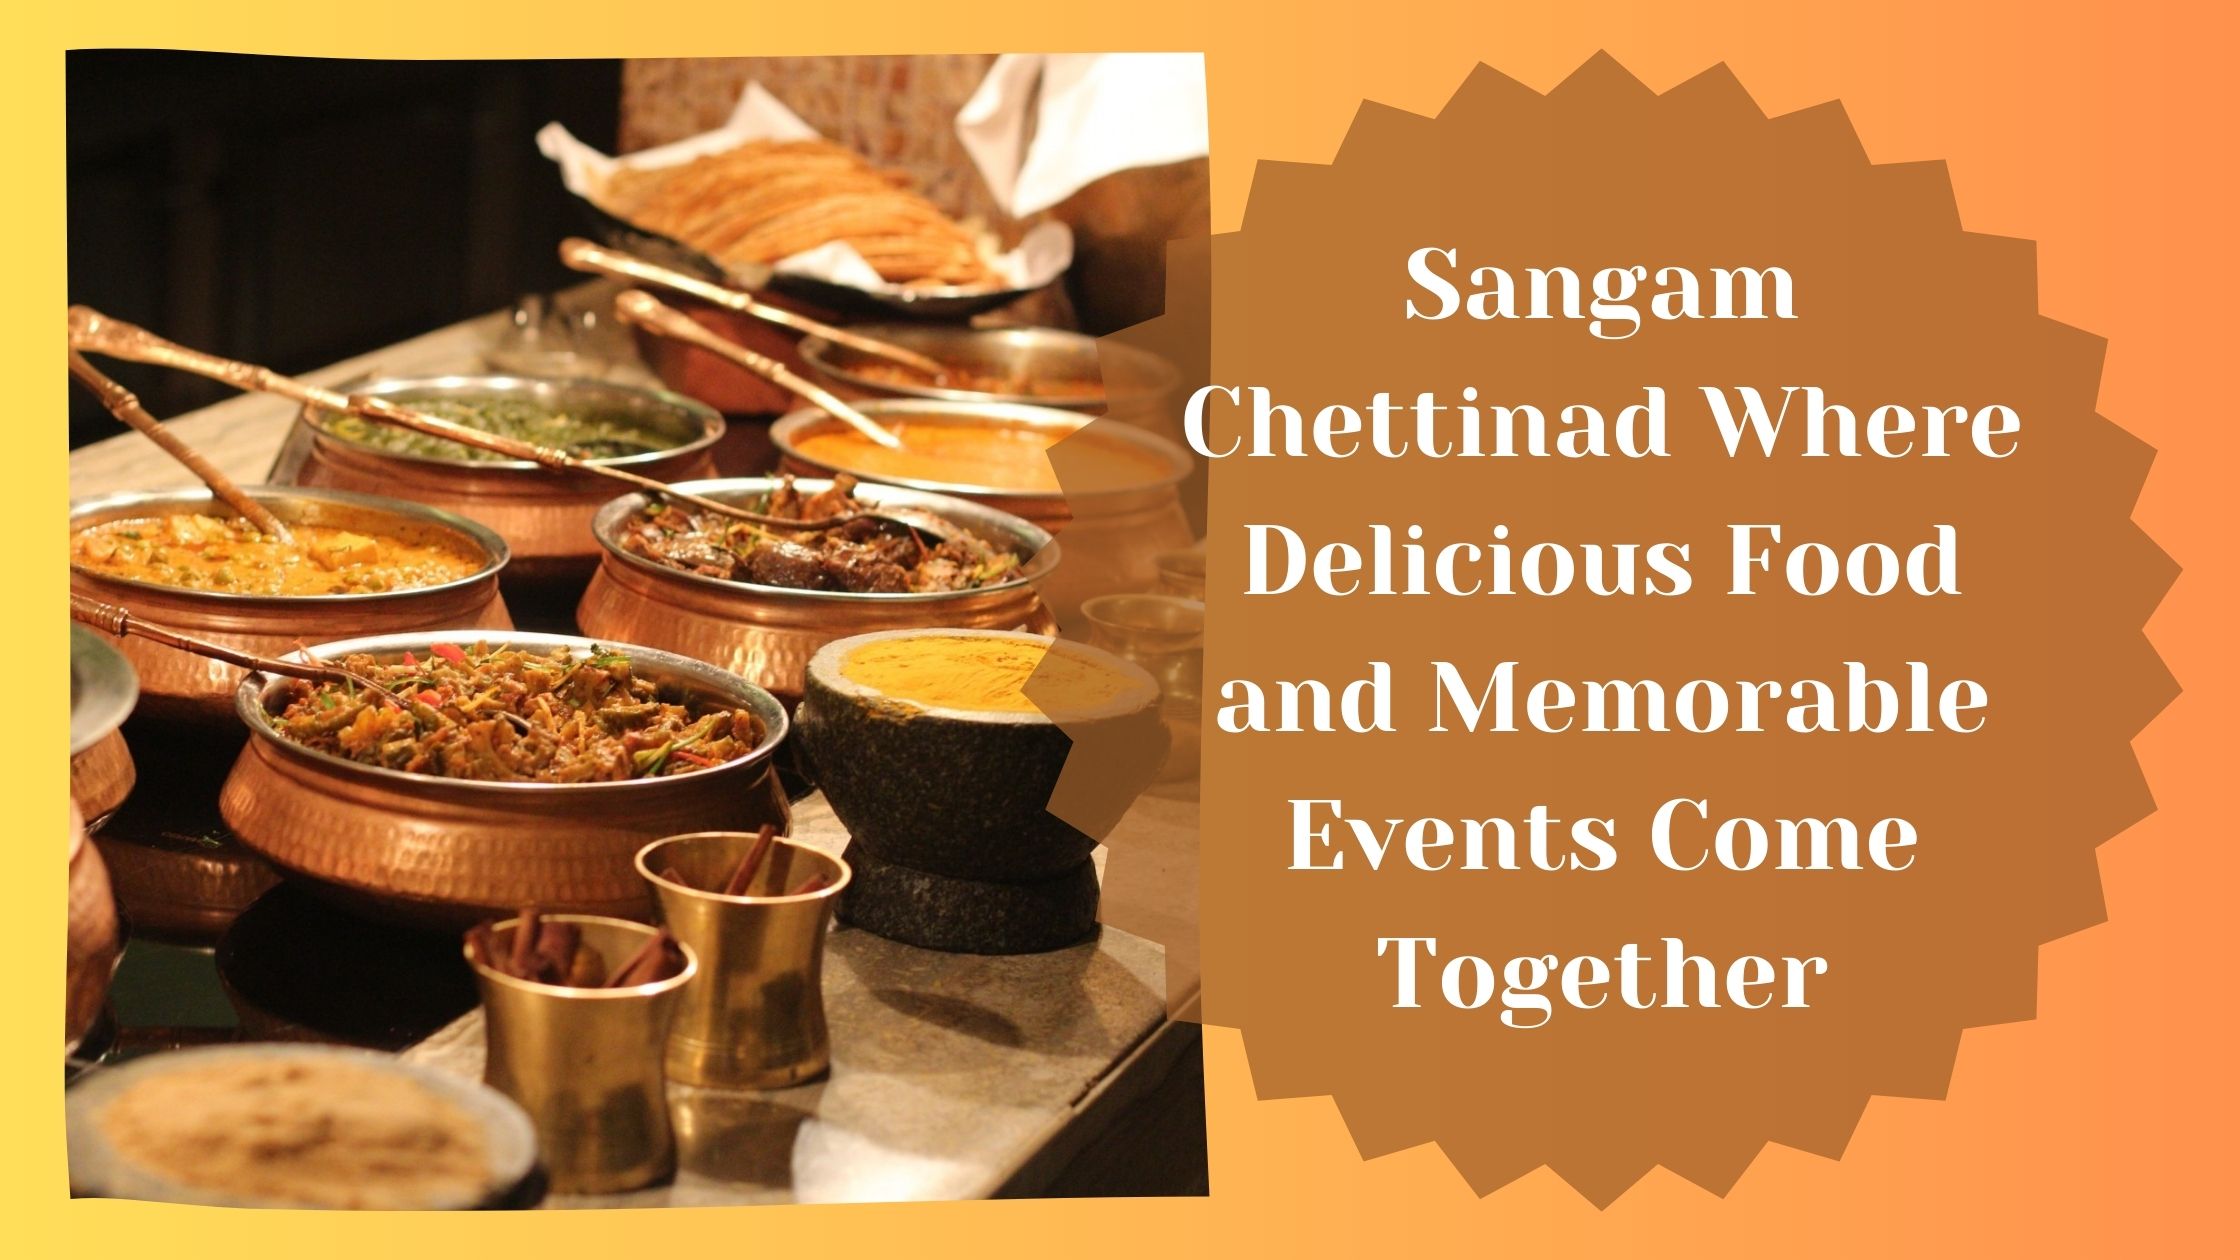 Sangam Chettinad Where Delicious Food and Memorable Events Come Together